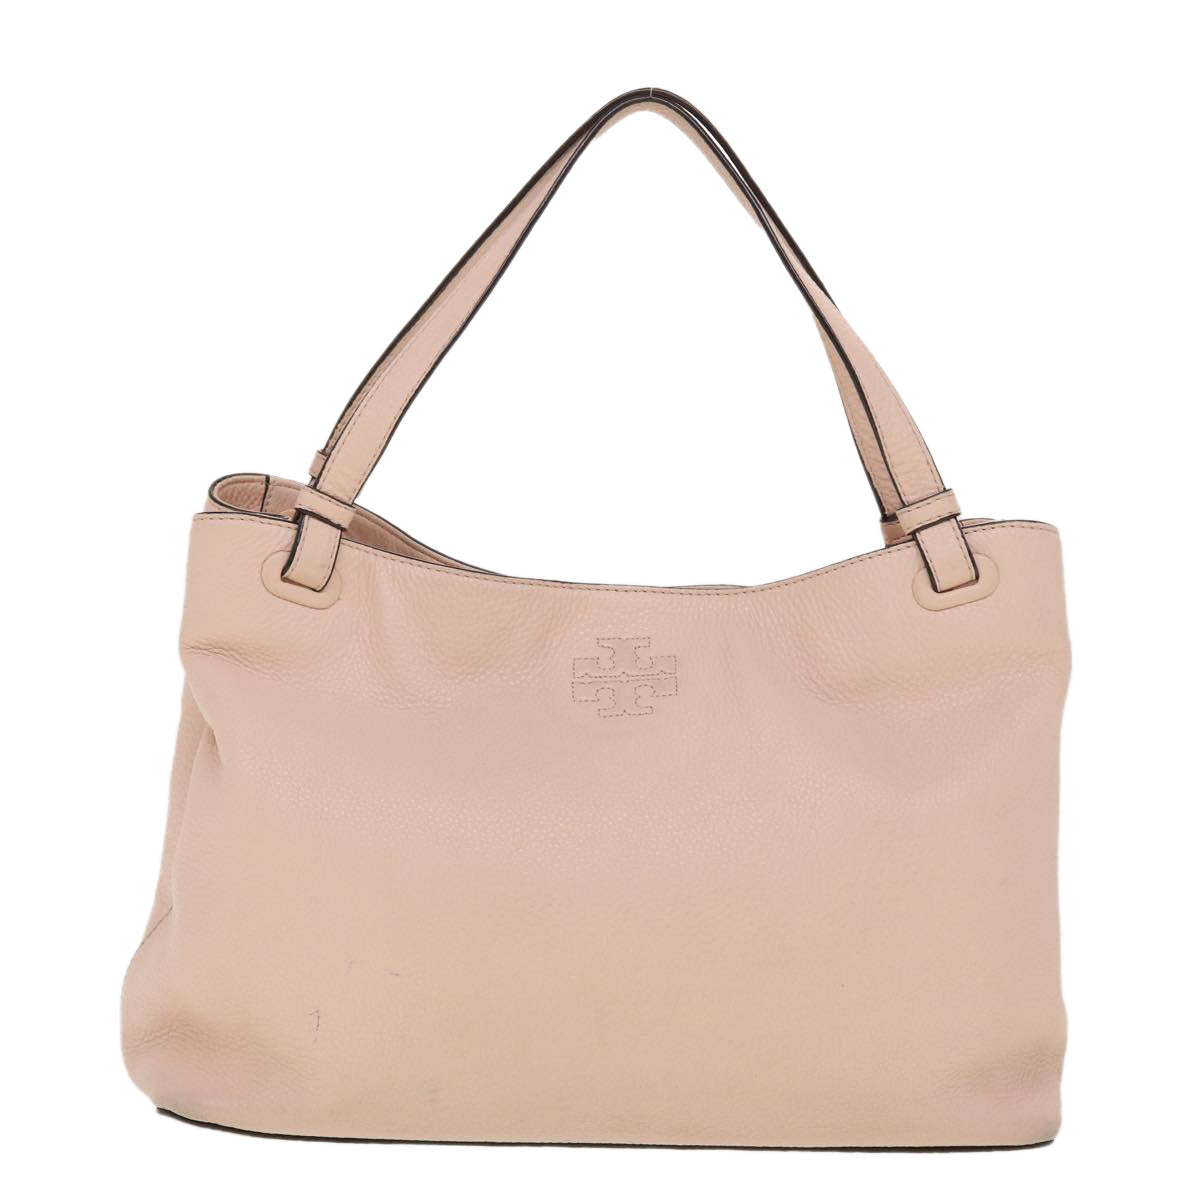 TORY BURCH Tote Bag Leather Pink Auth am4505